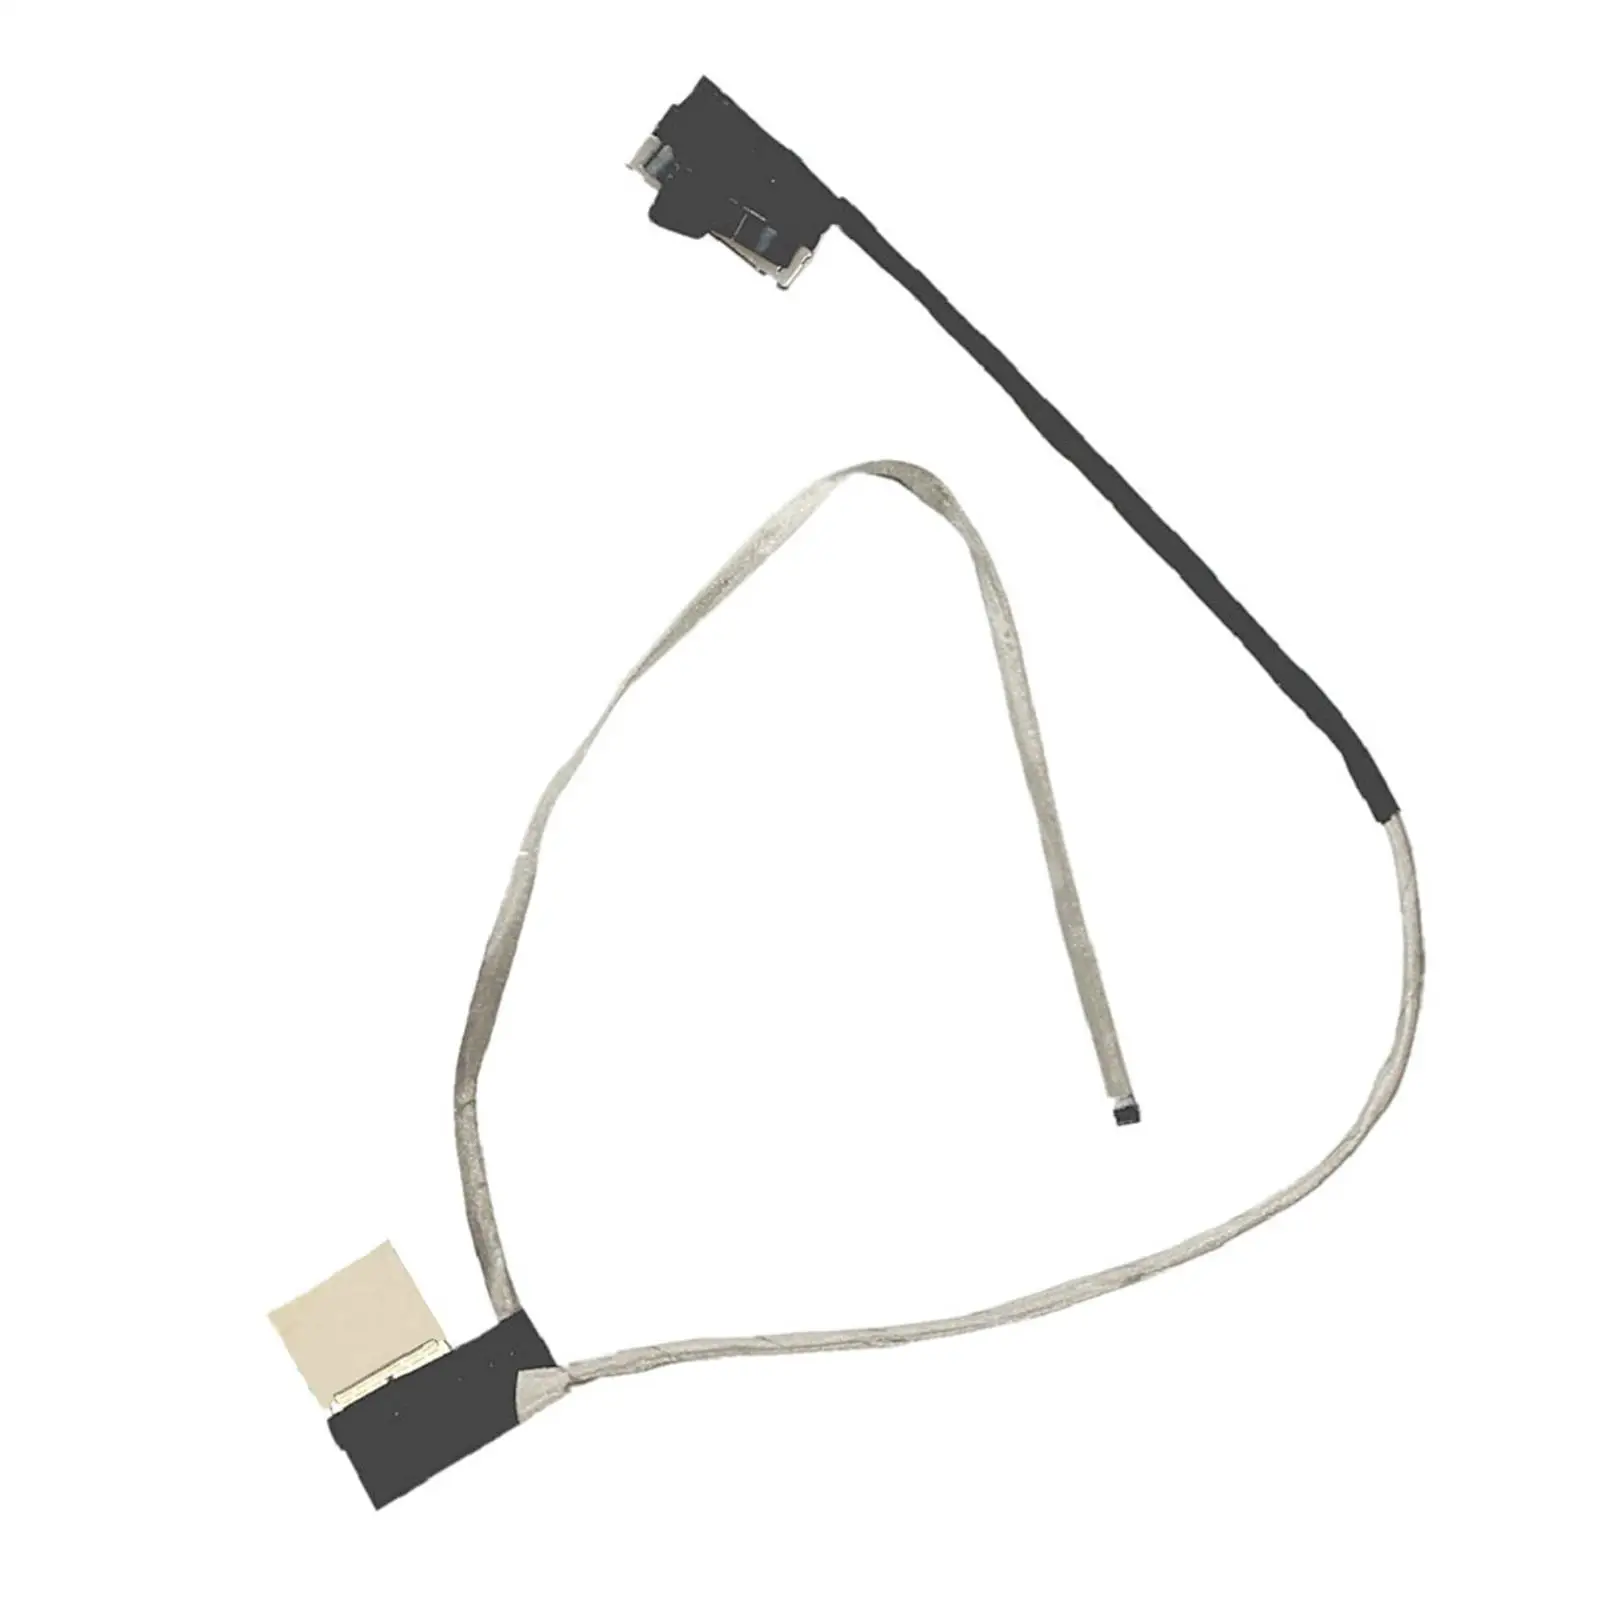 Professional LCD Lvds Display Cable Replacement for VX15 50.GM1N2.008 DC02002QL00 High Performance Easy to Install